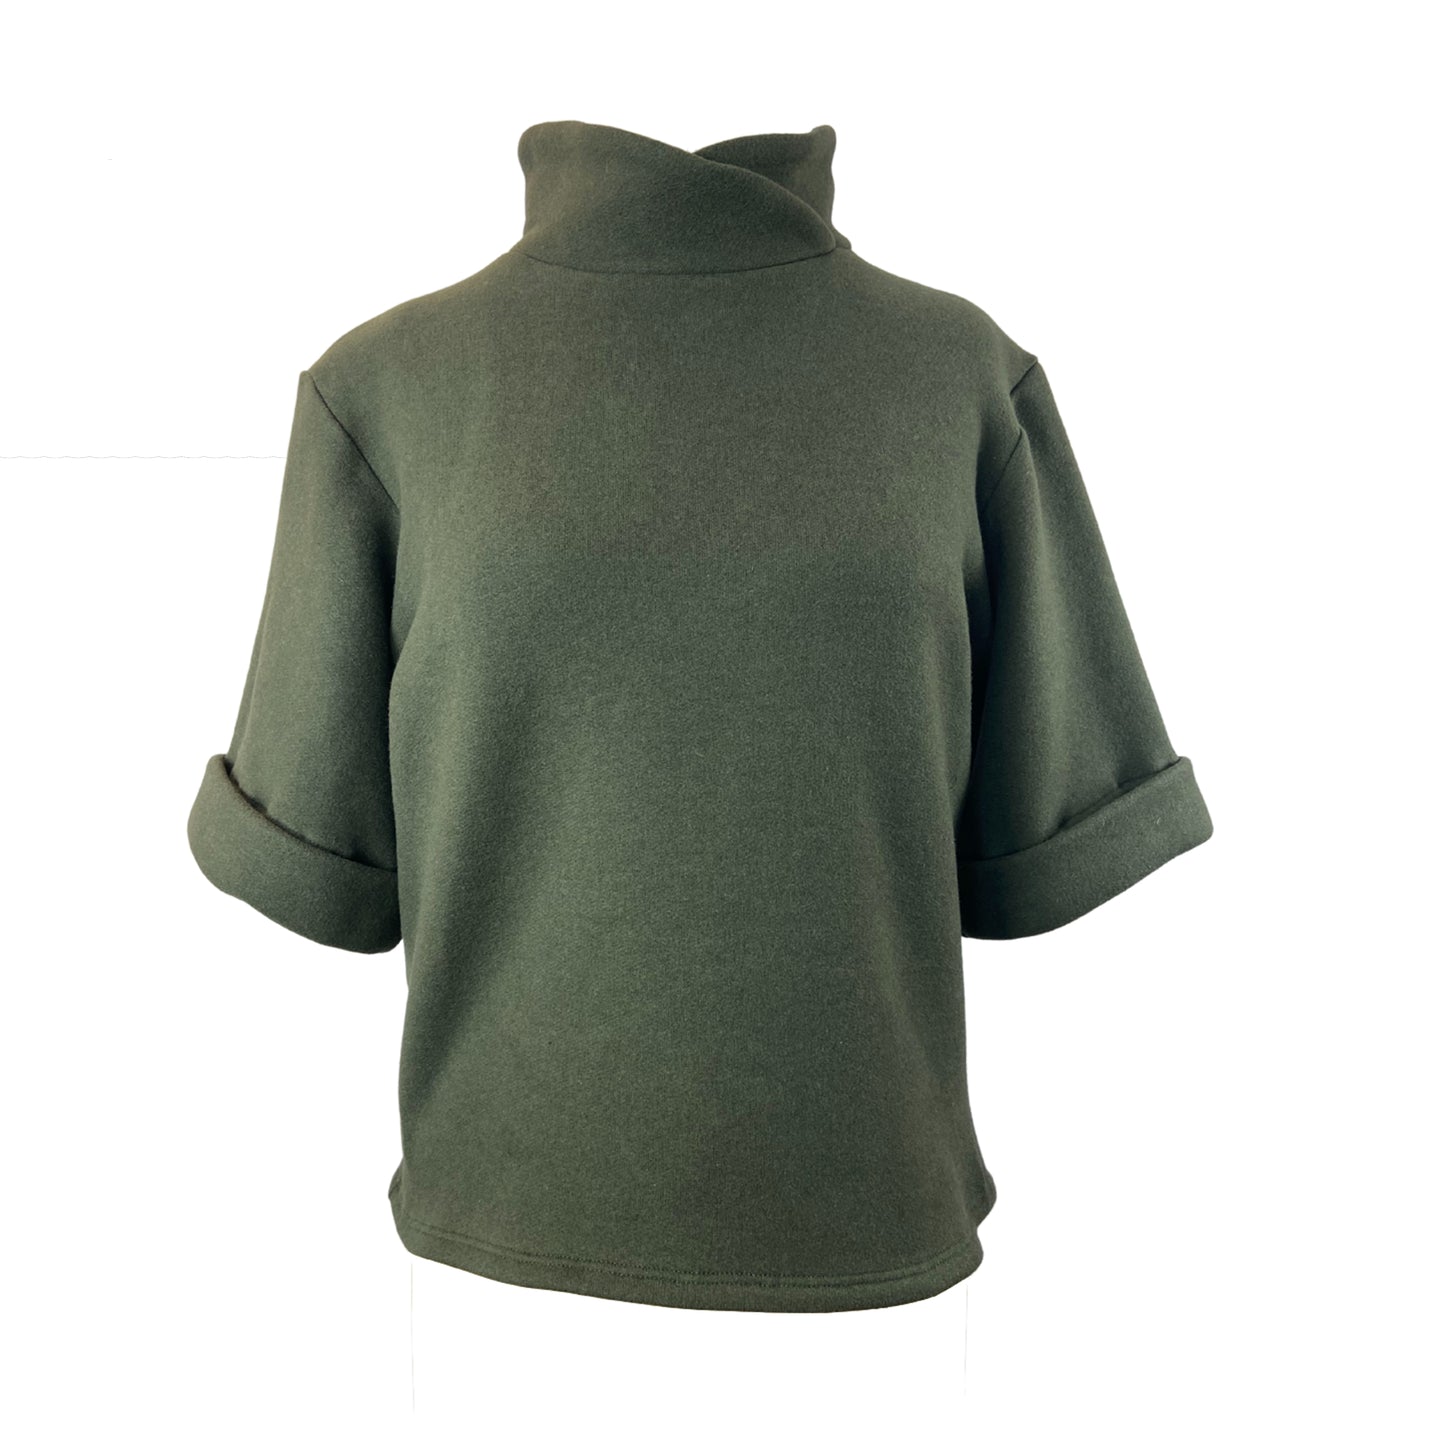 Back of olive sweater with short sleeves and fold over collar